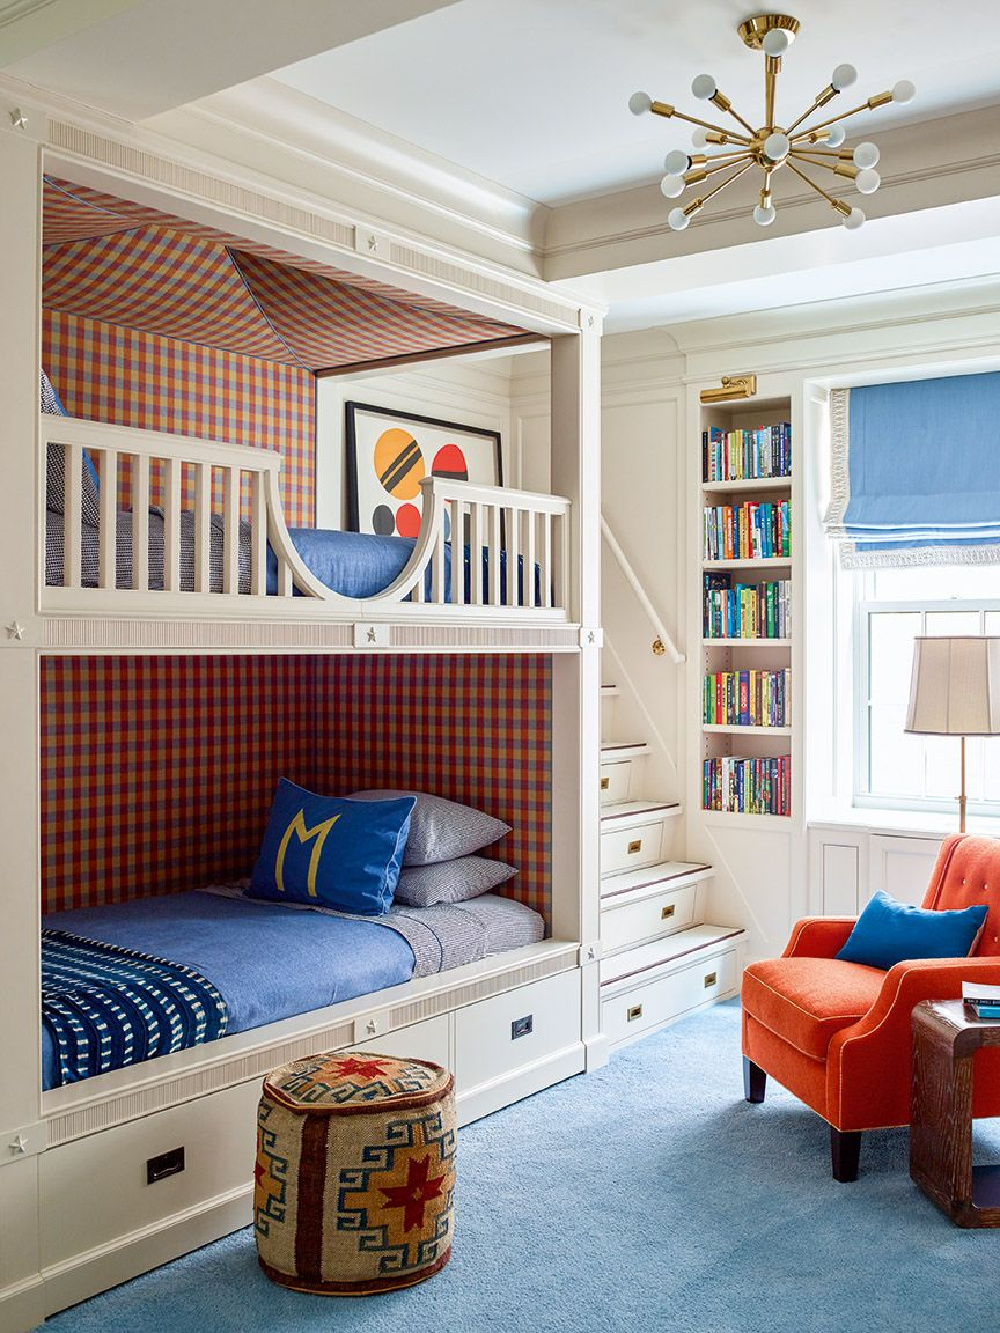 Custom bunk beds by Katie Ridder have drawers built into the stairs - from The Bunk Bed Book (Gibbs Smith, 2022) by Laura Fenton. #bunkbeds